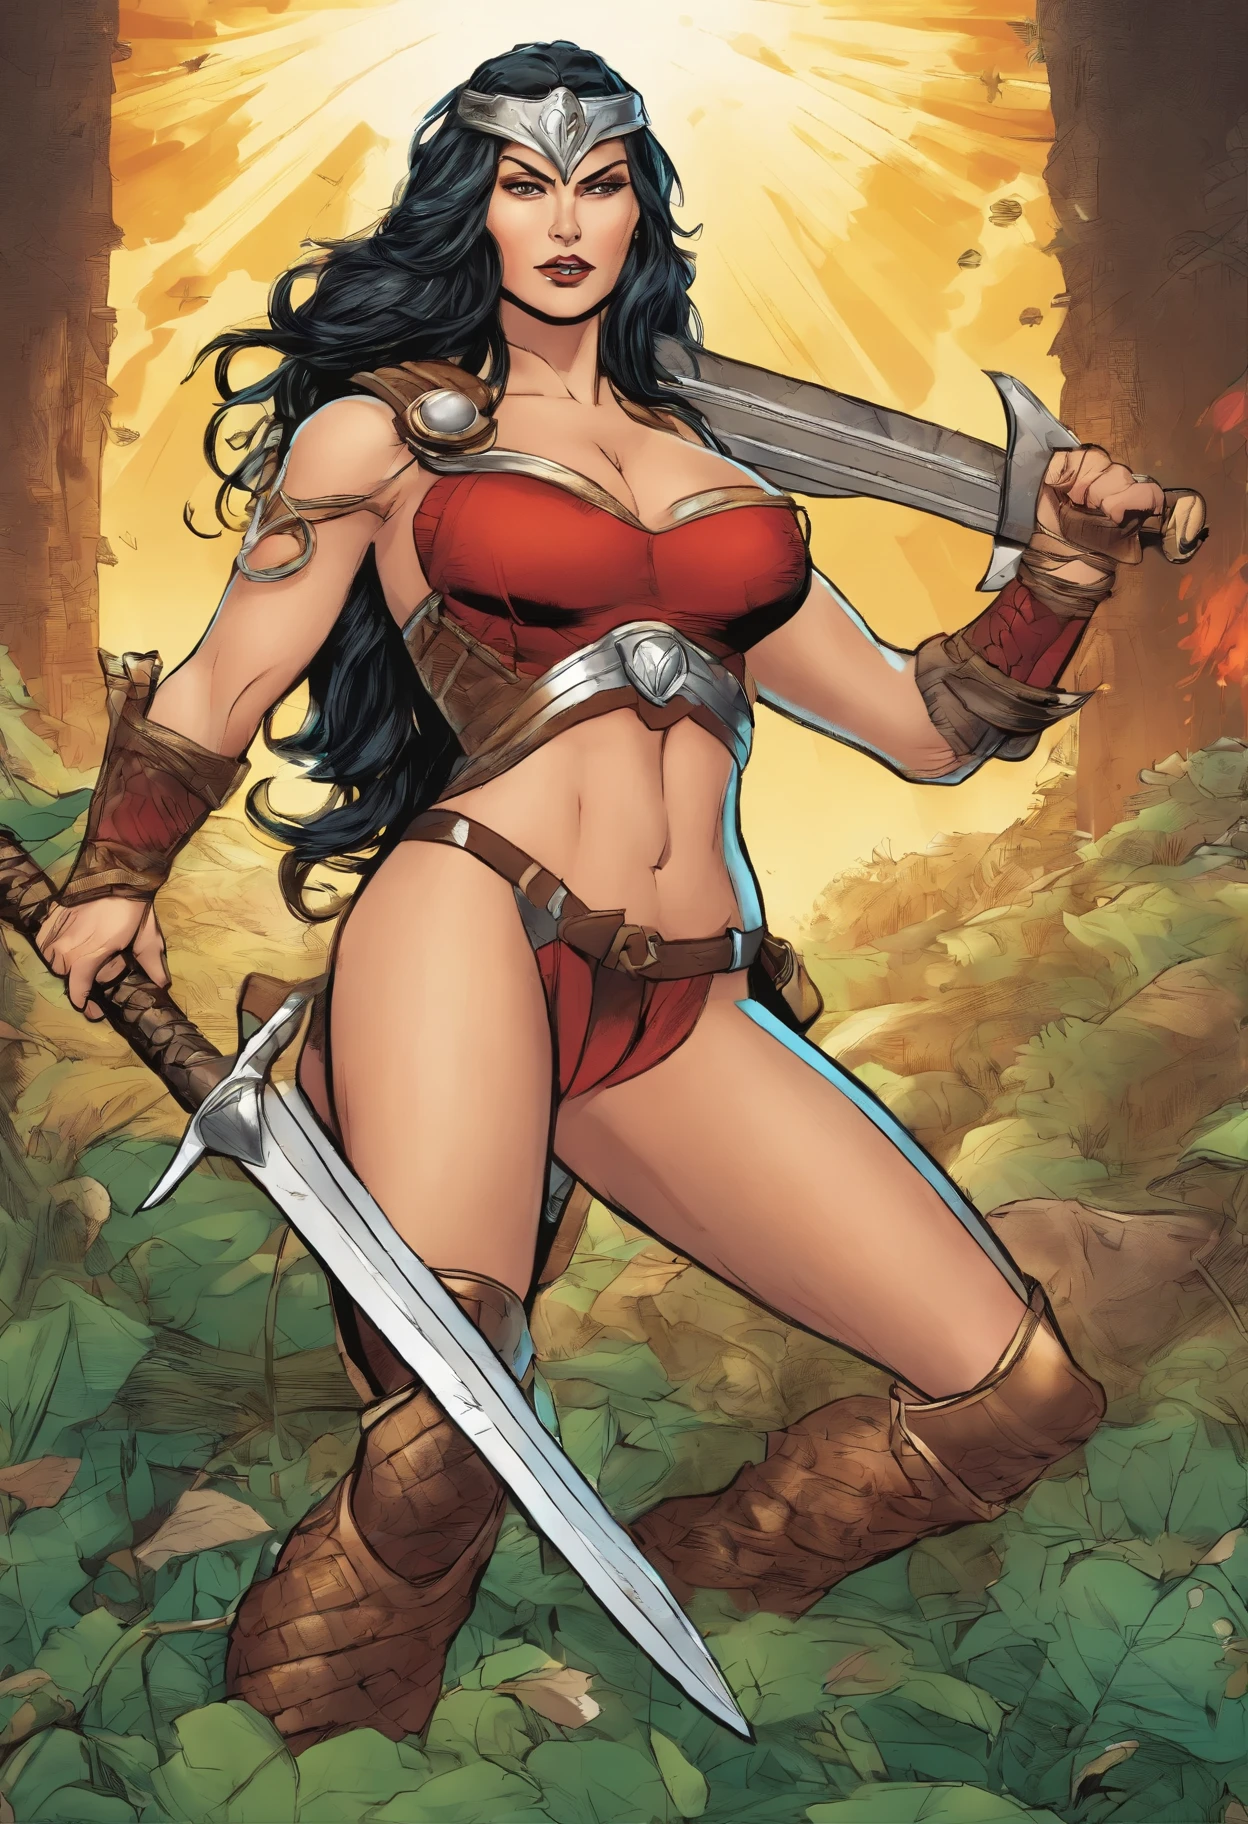 Fantasy,Female,Book,Femdom,Religion,Romance,Huge Breasts,You enter the Battlefield and defeat the enemy forces and save Lady Sif from certain Death, She might find ways to repay you